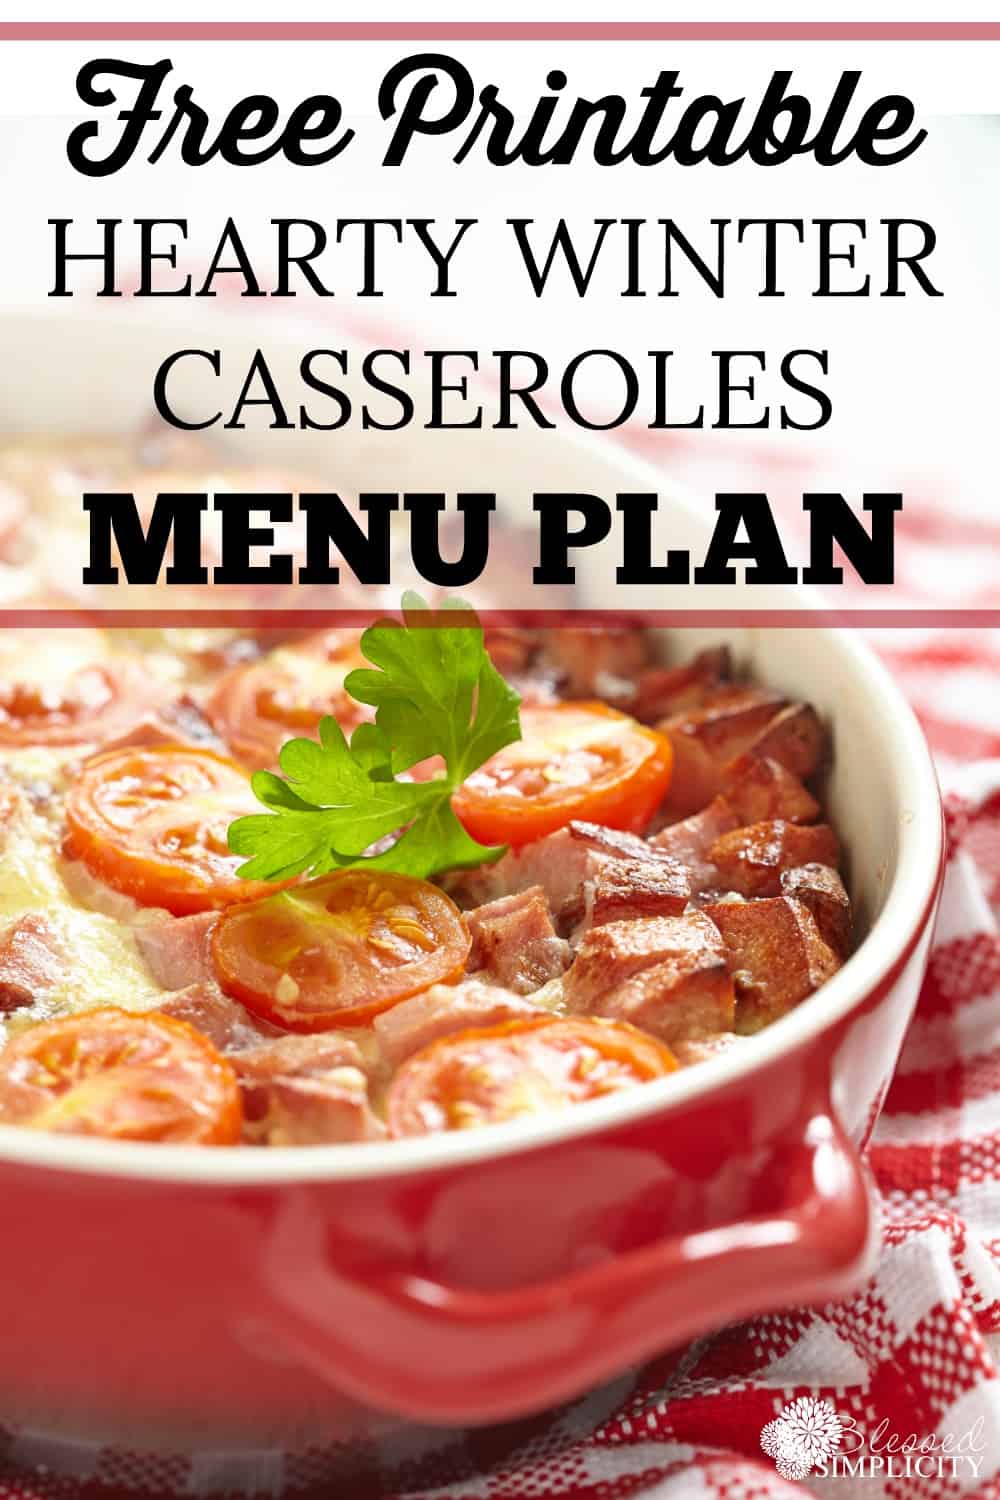 free printable menu plan includes 30 days of of hearty winter casseroles that will help get dinner on the table quickly!